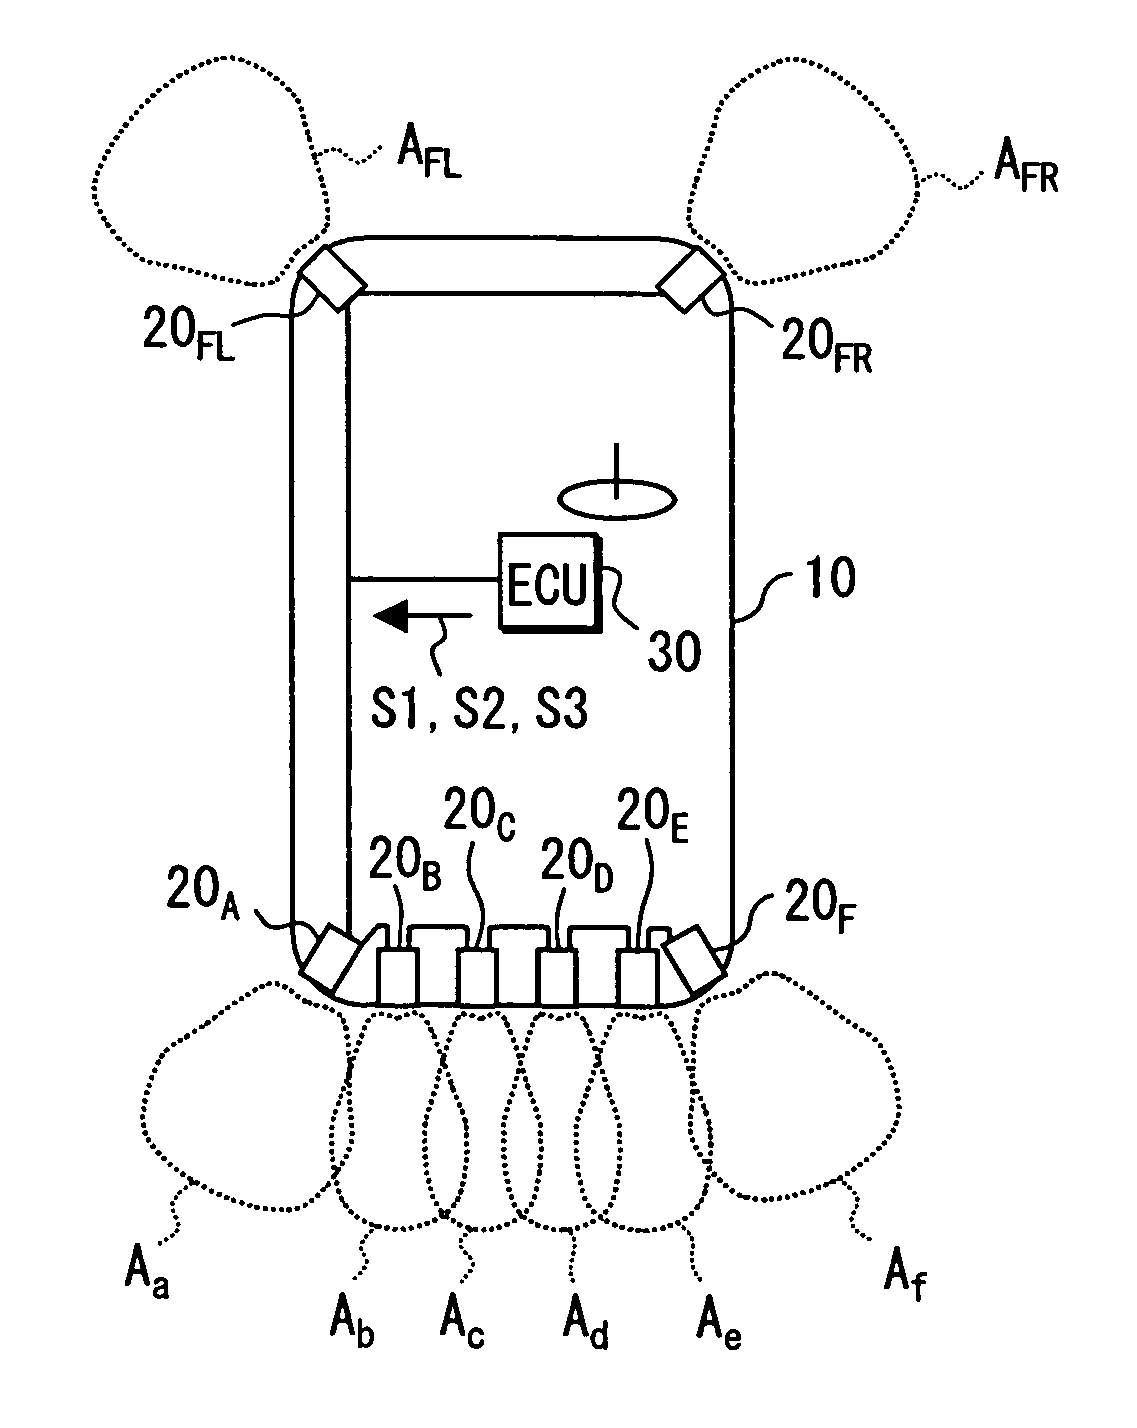 Obstacle detection device